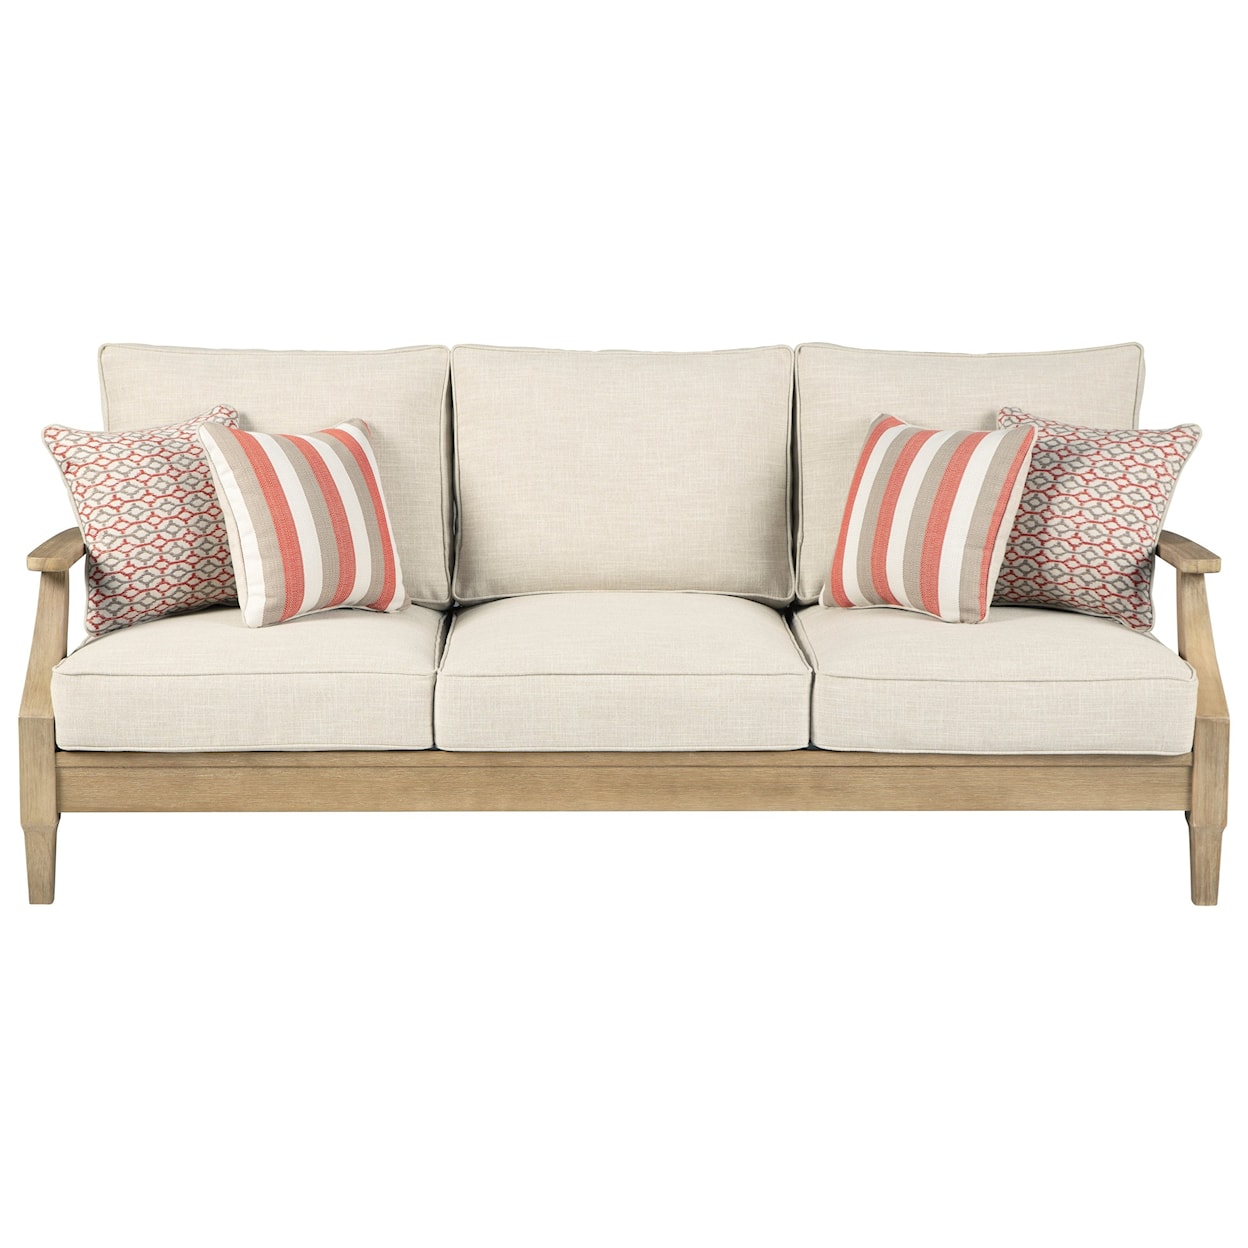 Signature Clare View Sofa with Cushion